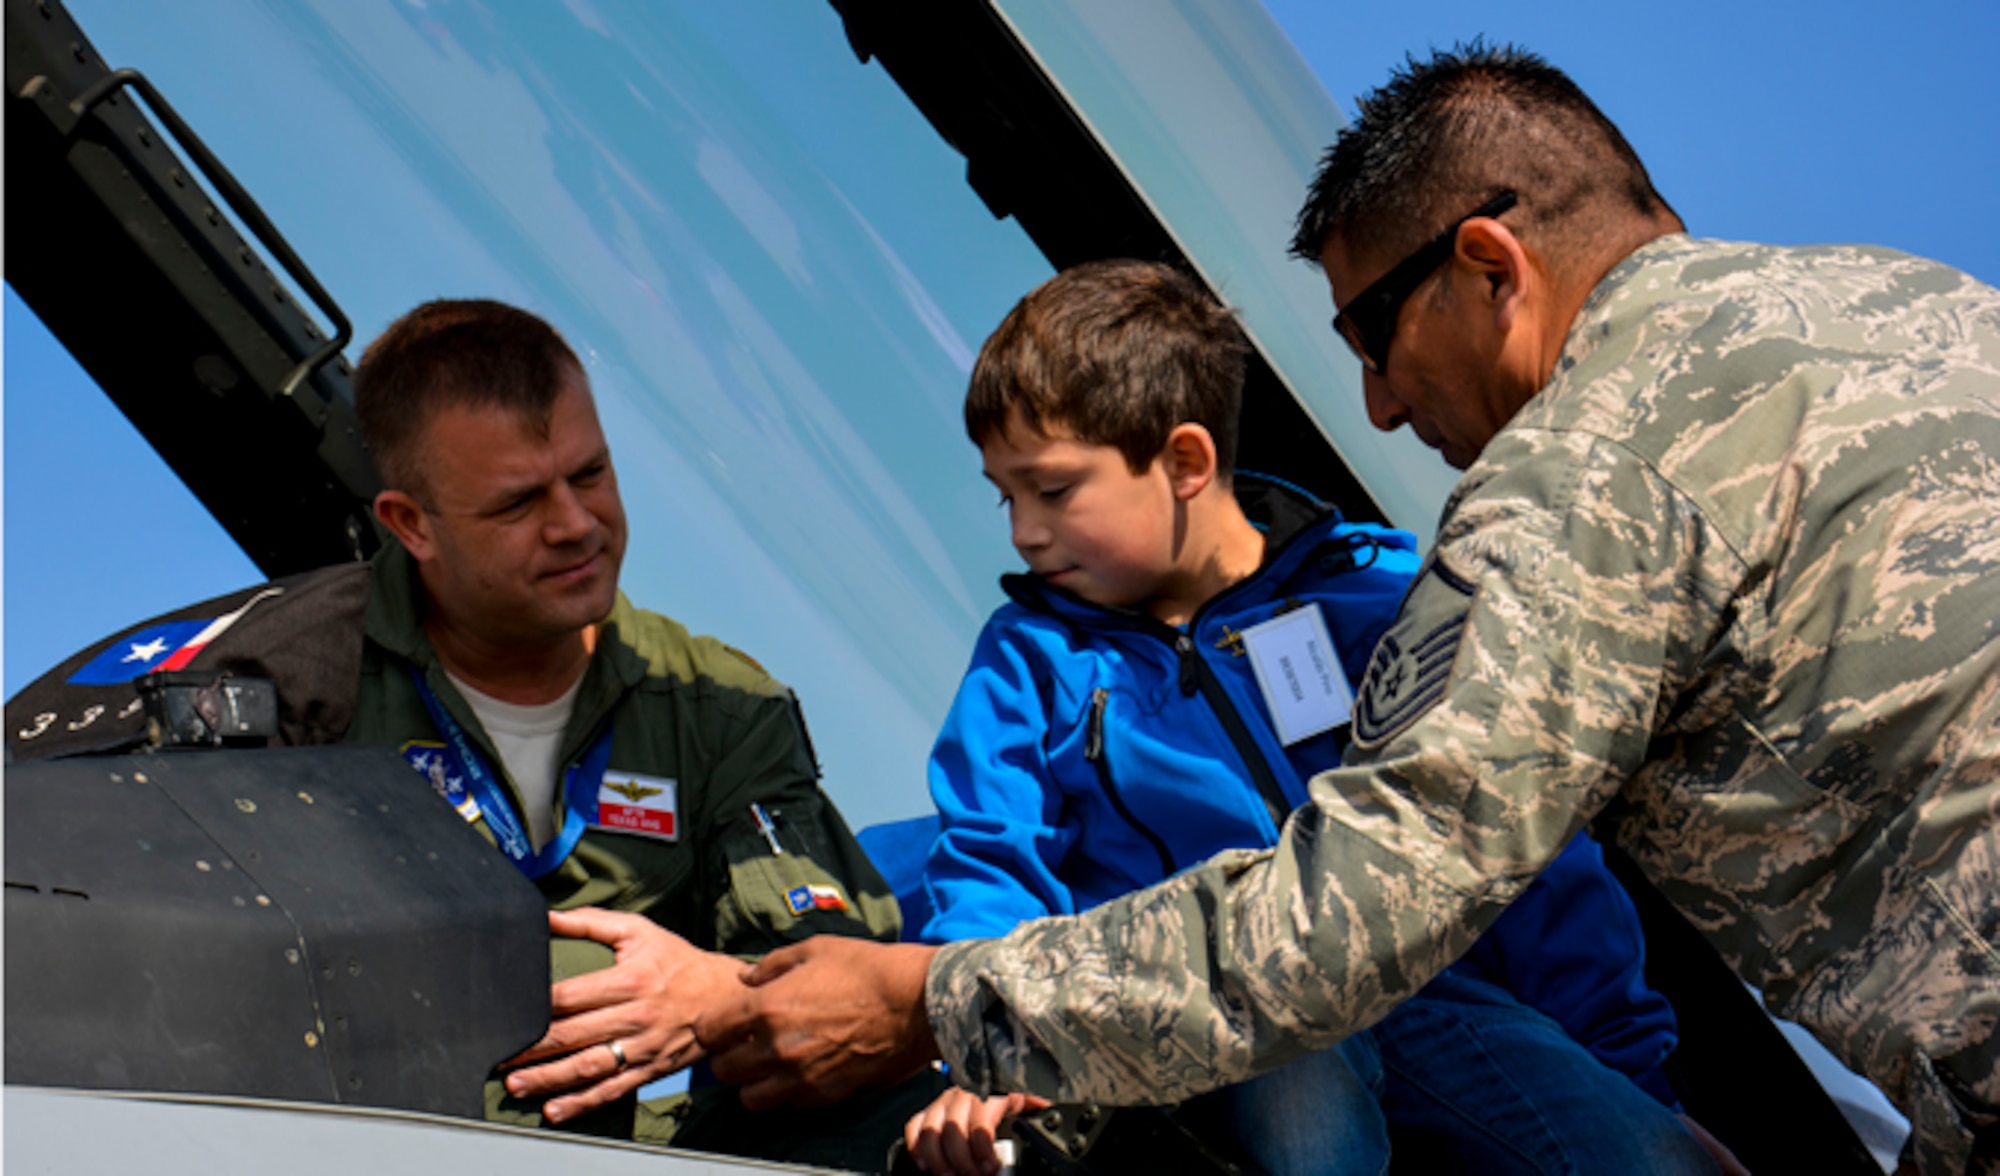 A Chilean boy from the Teletón Foundation gets an up-close view inside an F-16 Fighting Falcon and discusses the aircraft with Maj. Scott Elrod and Master Sgt. Carlos Rodriguez on March 26, 2014, at the FIDAE Air Show in Santiago, Chile. Nearly 60 Airmen are participate as subject matter experts during FIDAE, hosting static displays of the C-130 Hercules and F-16. Elrod is an F-16 pilot and Rodriquez is an F-16 maintenance specialist. (U.S. Air Force photo/Capt. Justin Brockhoff)